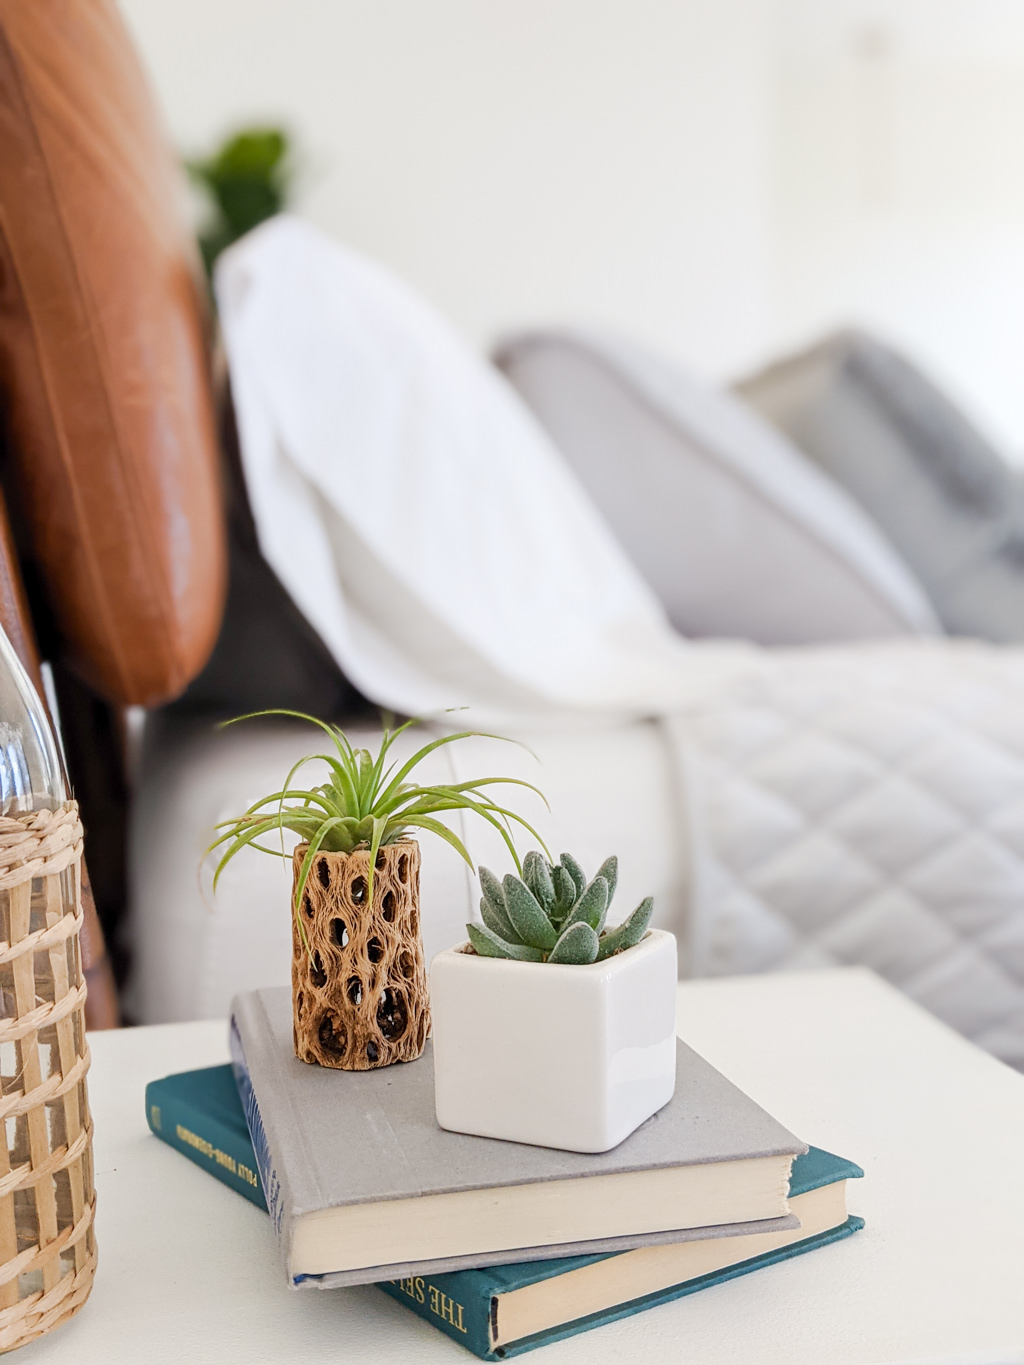 Plants and books on a bedroom nightstand